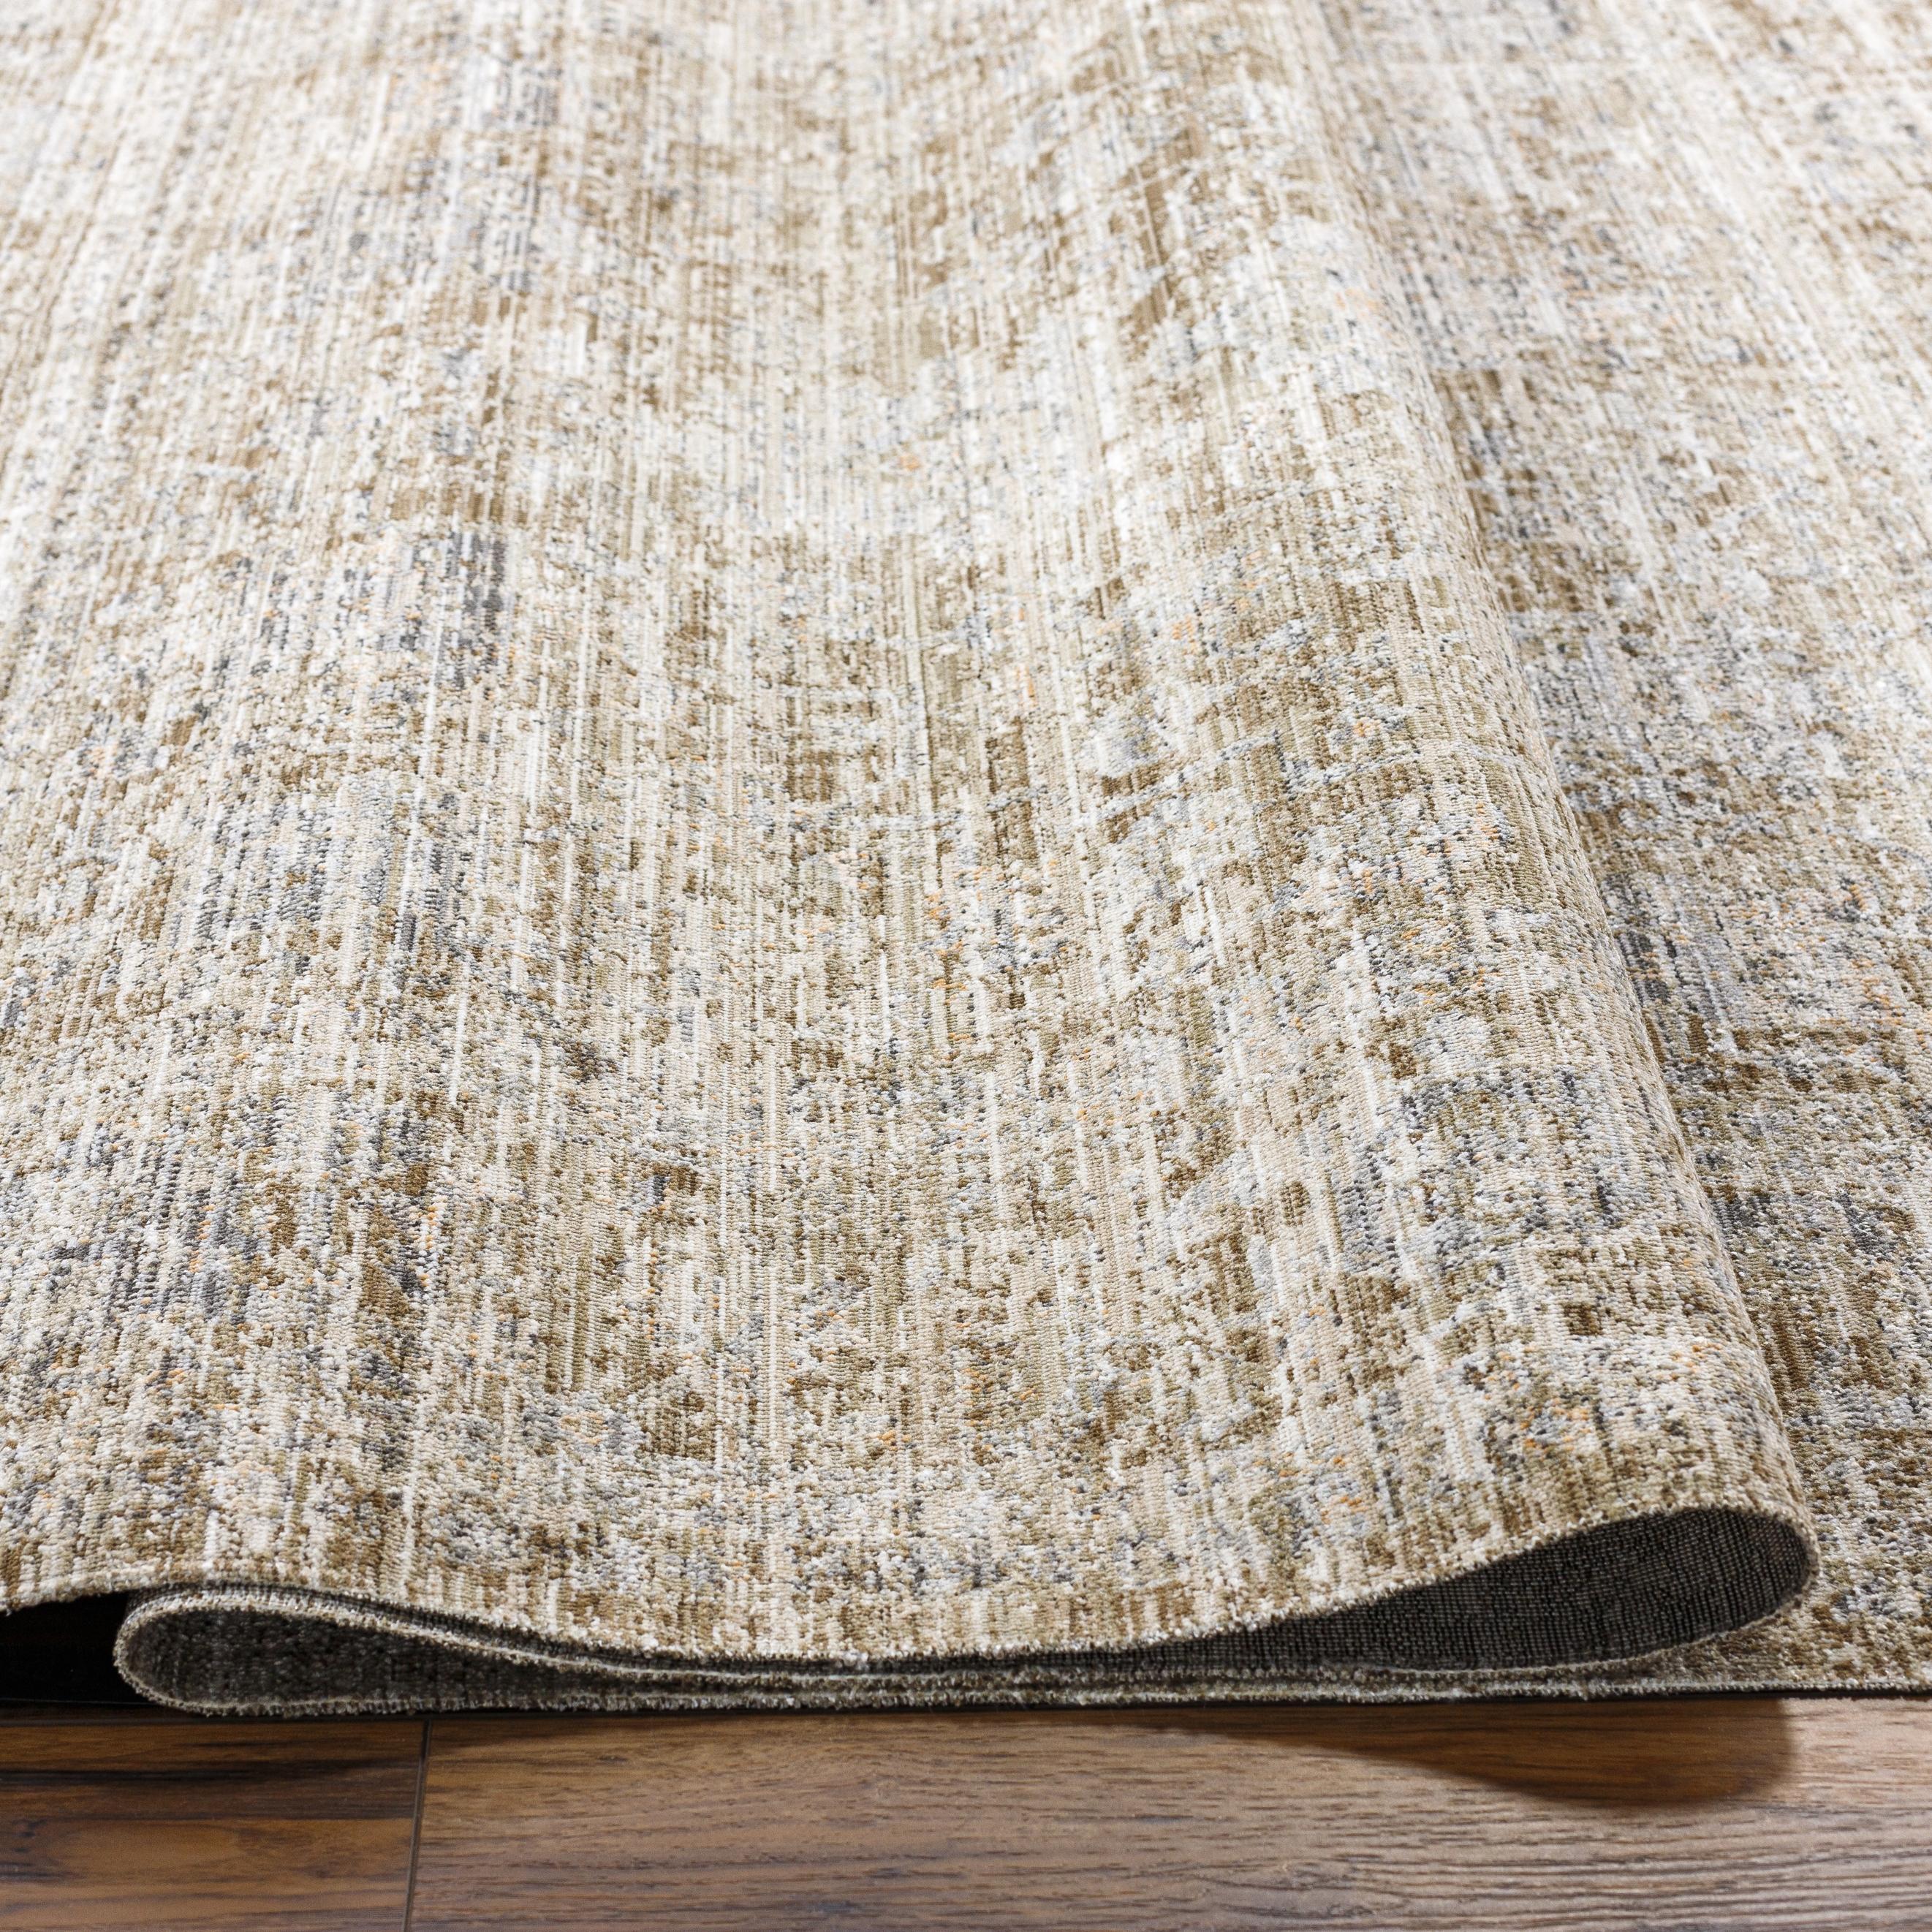 The Margaret area rug brings a touch of timeless beauty to any room. This special collaboration piece from Becki Owens x Surya is a stunning addition to your home. With a distressed feel, the rug evokes a feeling of antique charm. Crafted with polyester, the rug features beautiful neutral tones and is perfect for high traffic areas. Amethyst Home provides interior design, new home construction design consulting, vintage area rugs, and lighting in the Portland metro area.